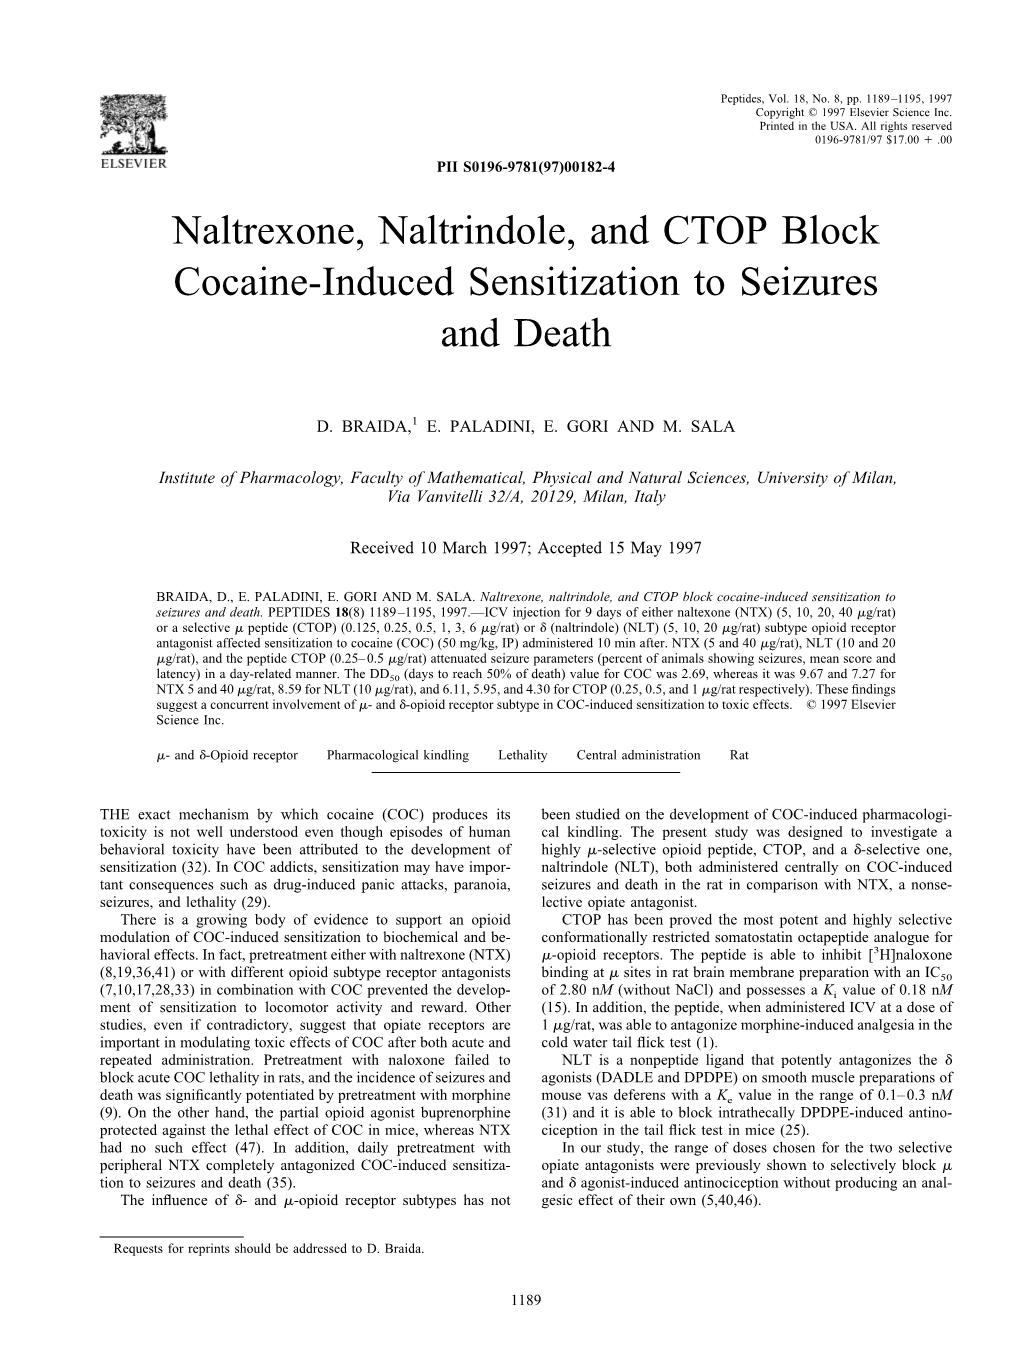 Naltrexone, Naltrindole, and CTOP Block Cocaine-Induced Sensitization to Seizures and Death